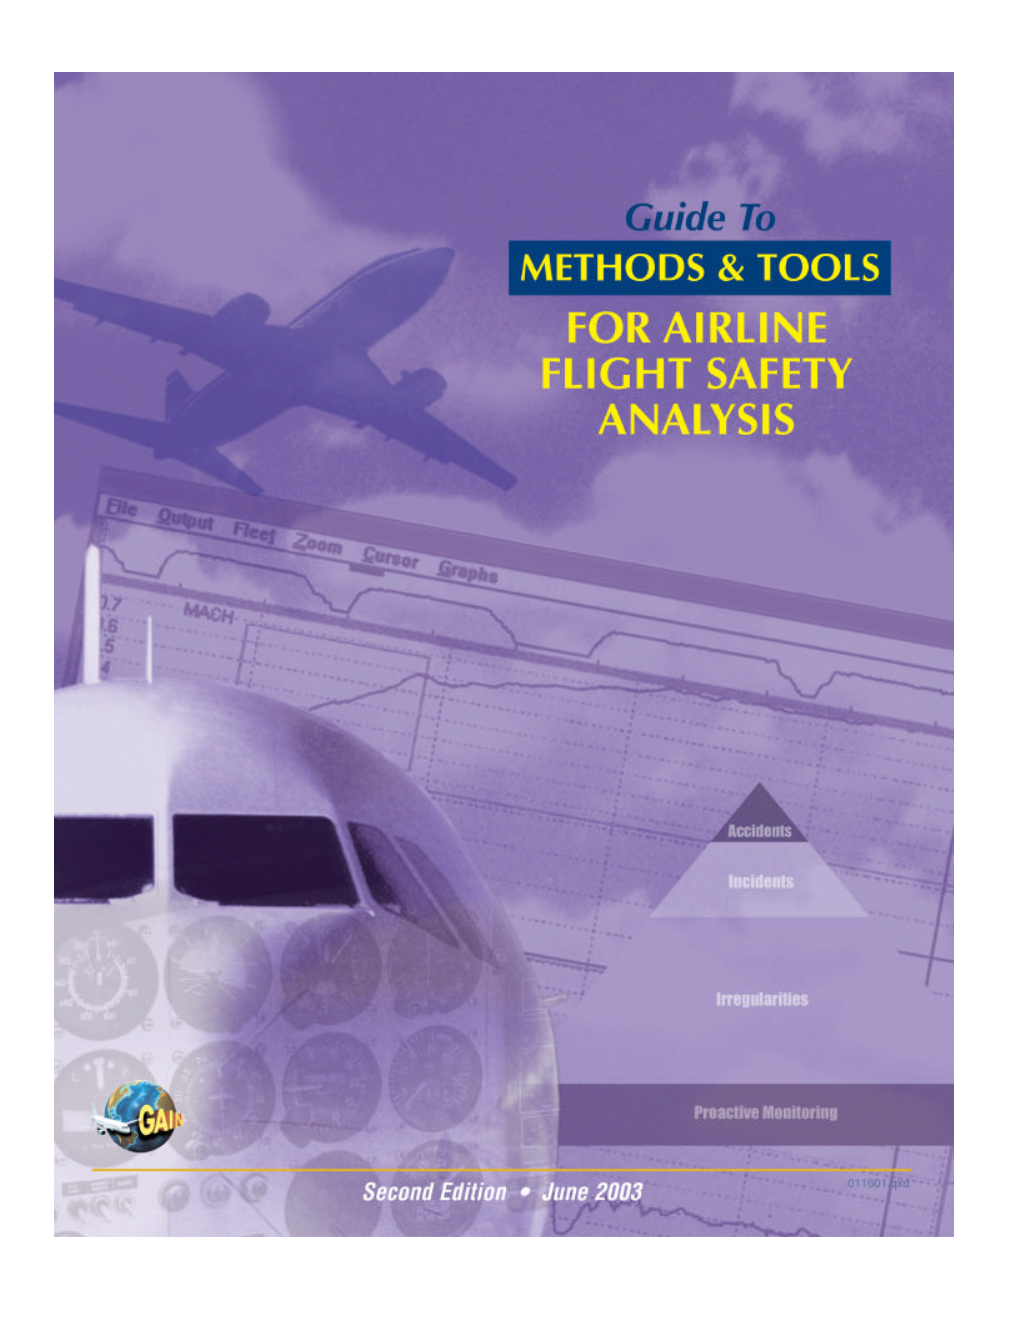 Guide to Methods & Tools for Airline Flight Safety Analysis, Issue 2